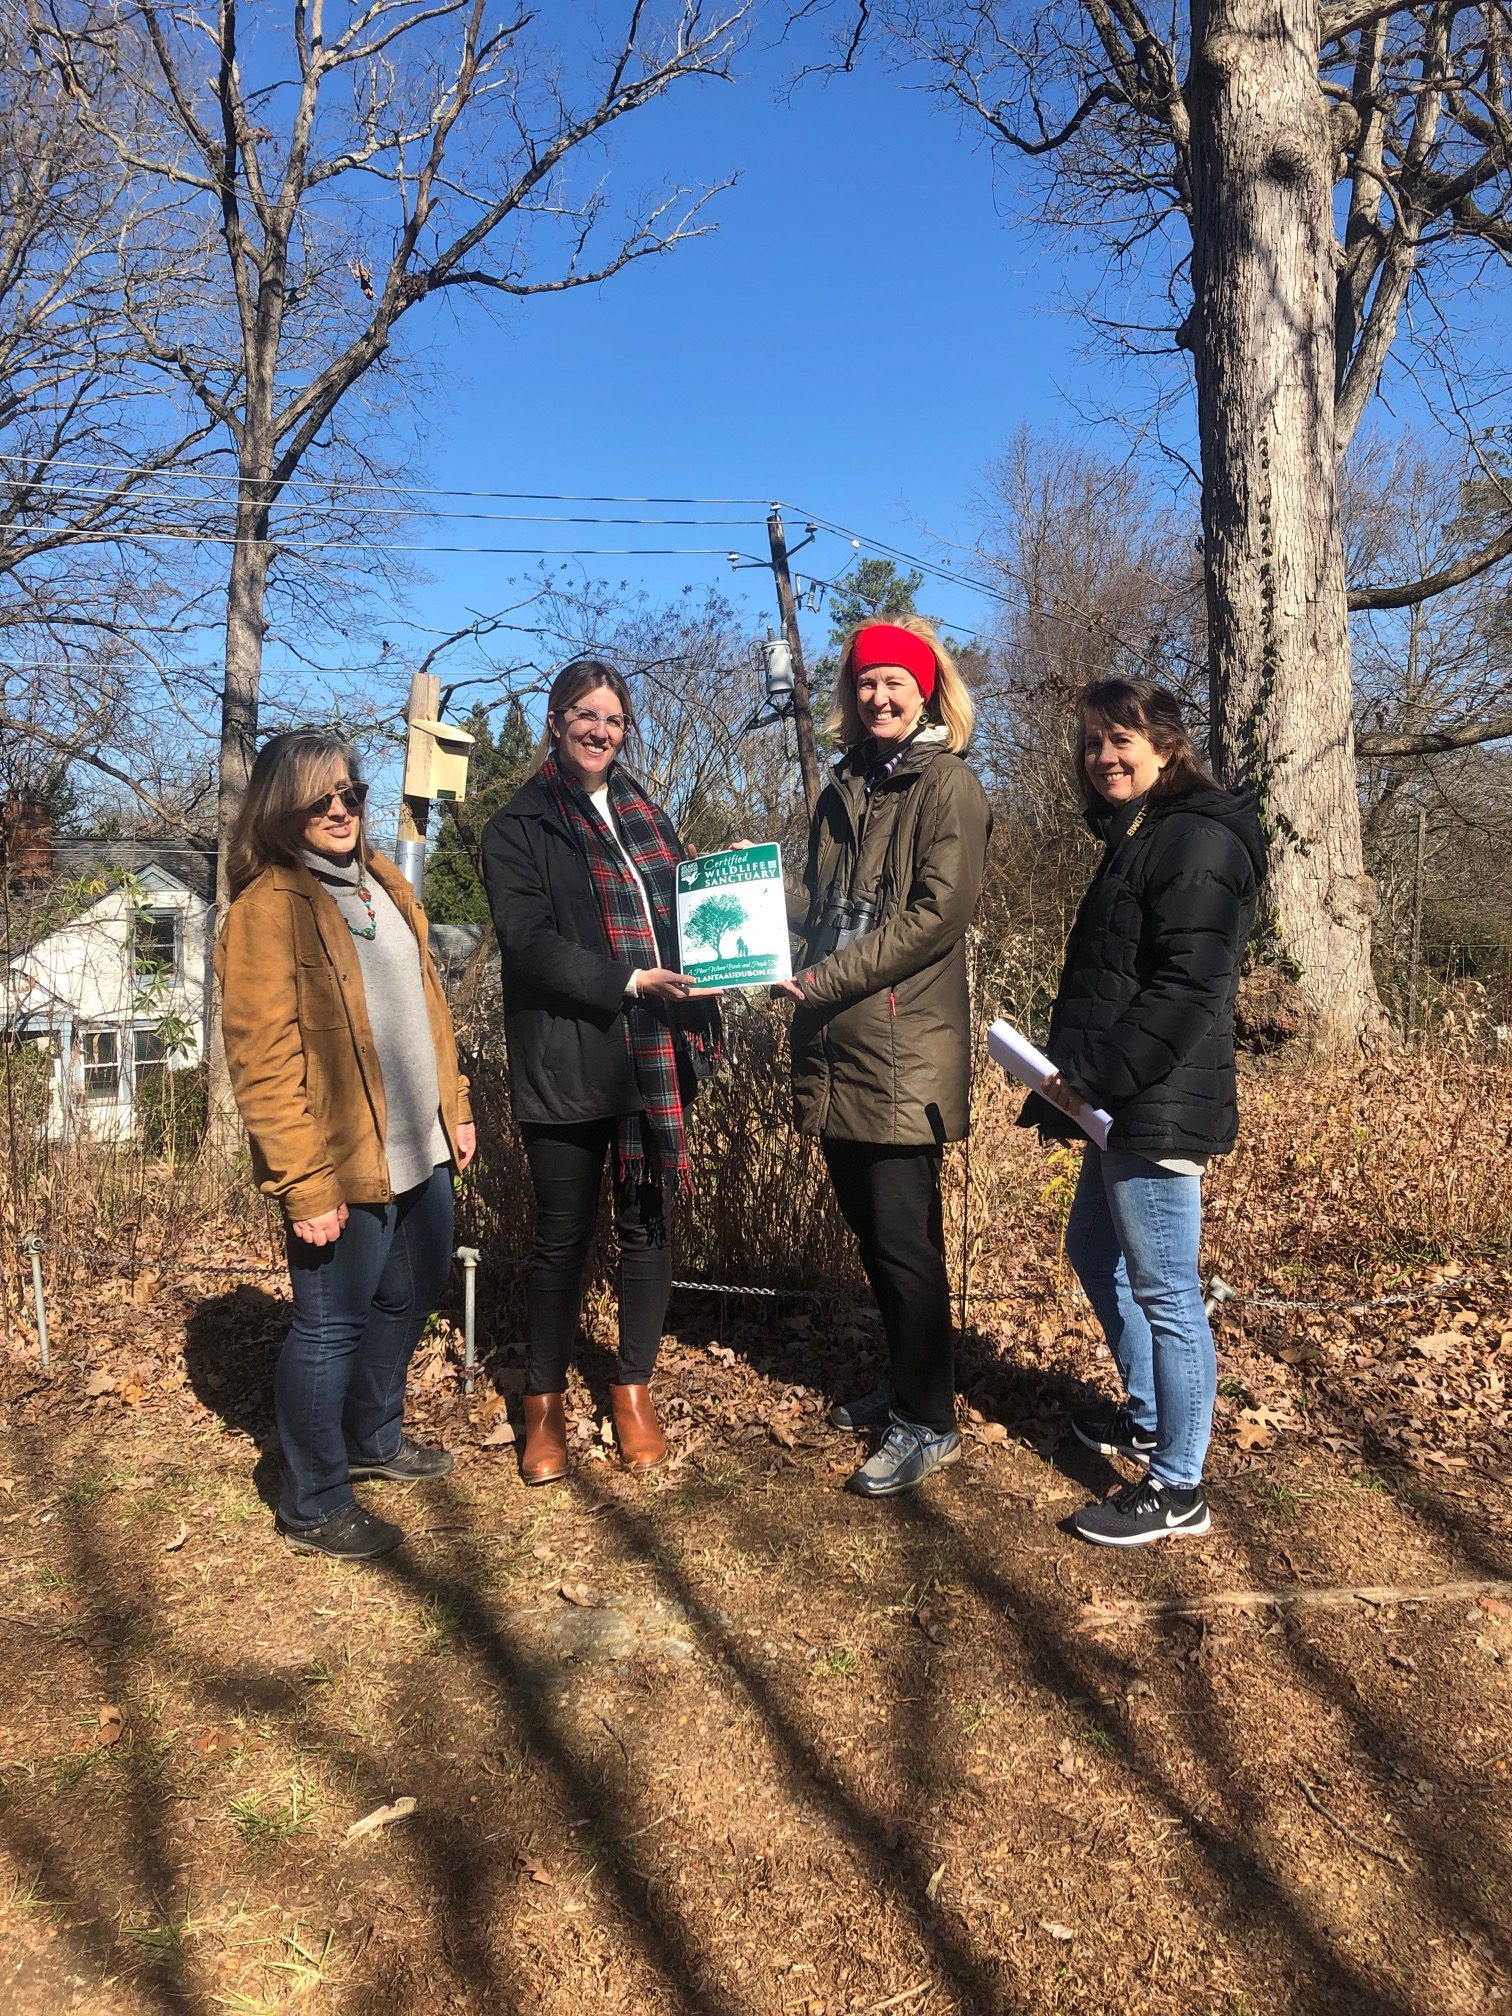 Community project: Pandra Williams looking on as Laura Hennighausen, Executive Director, is being presented with the Wildlife Habitat Certification sign by Atlanta Audubon Society Board Members Melinda Langston and Leslie Edwards.